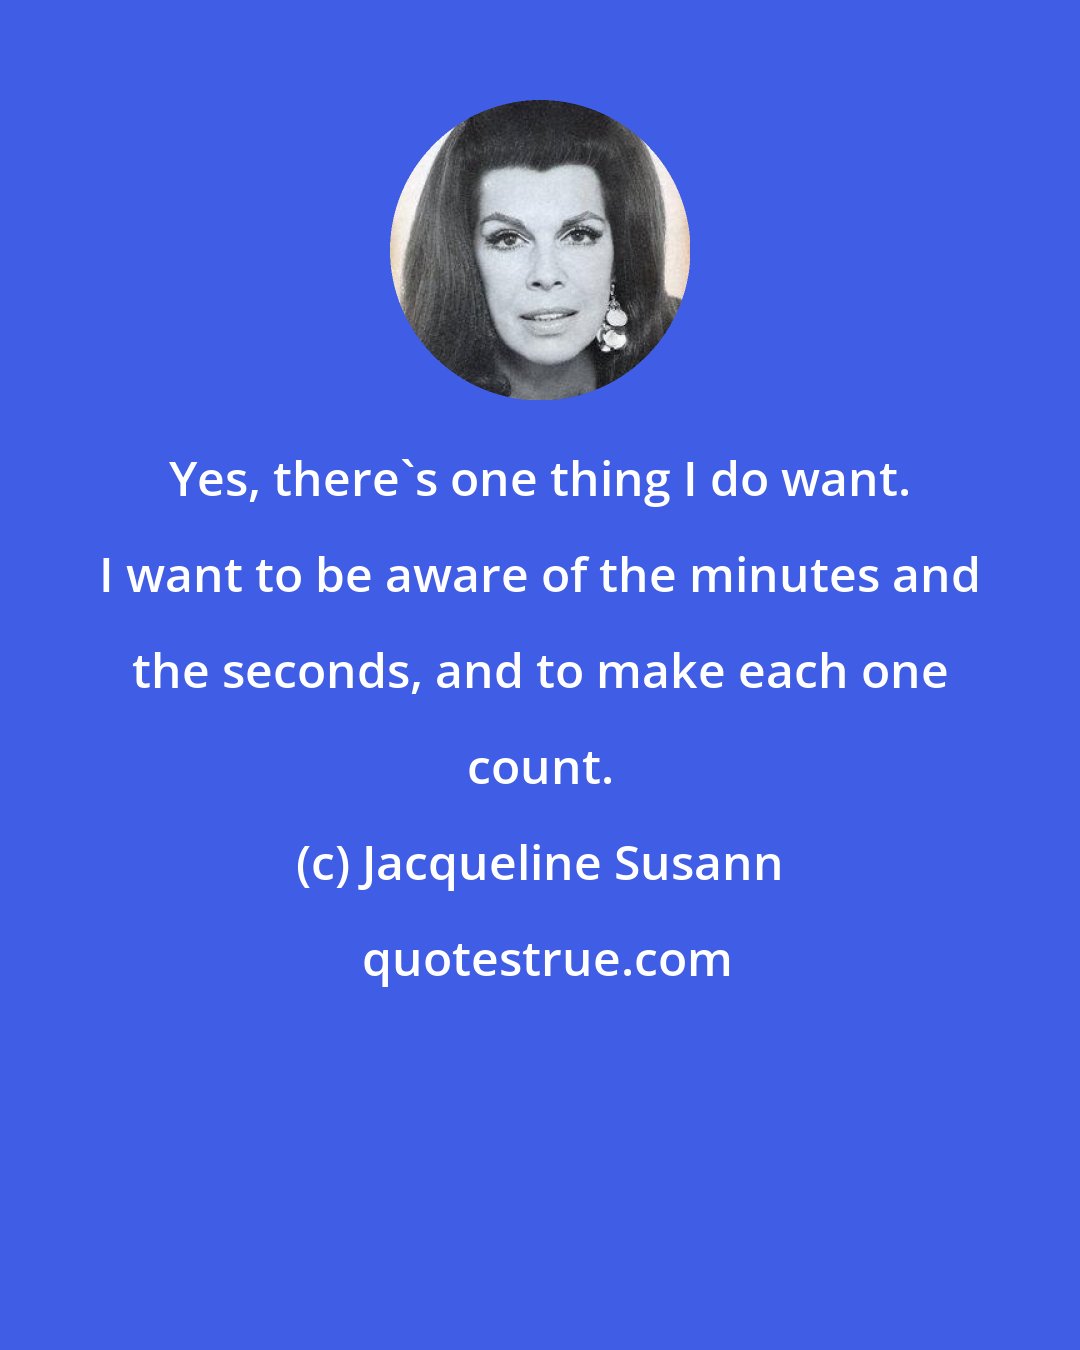 Jacqueline Susann: Yes, there's one thing I do want. I want to be aware of the minutes and the seconds, and to make each one count.